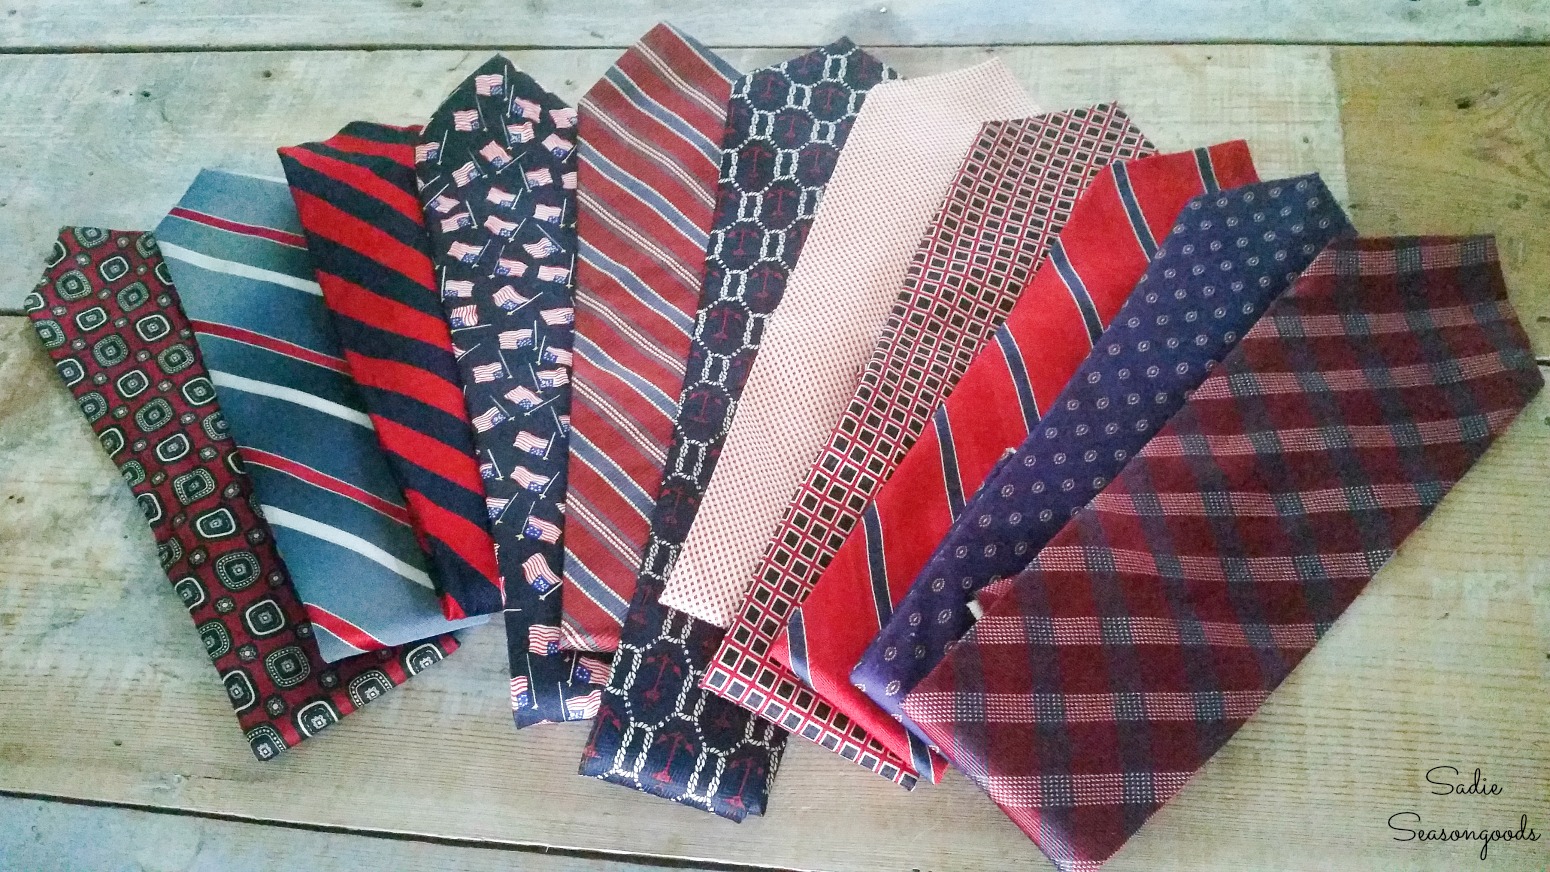 Cheap neckties and novelty ties from the thrift store